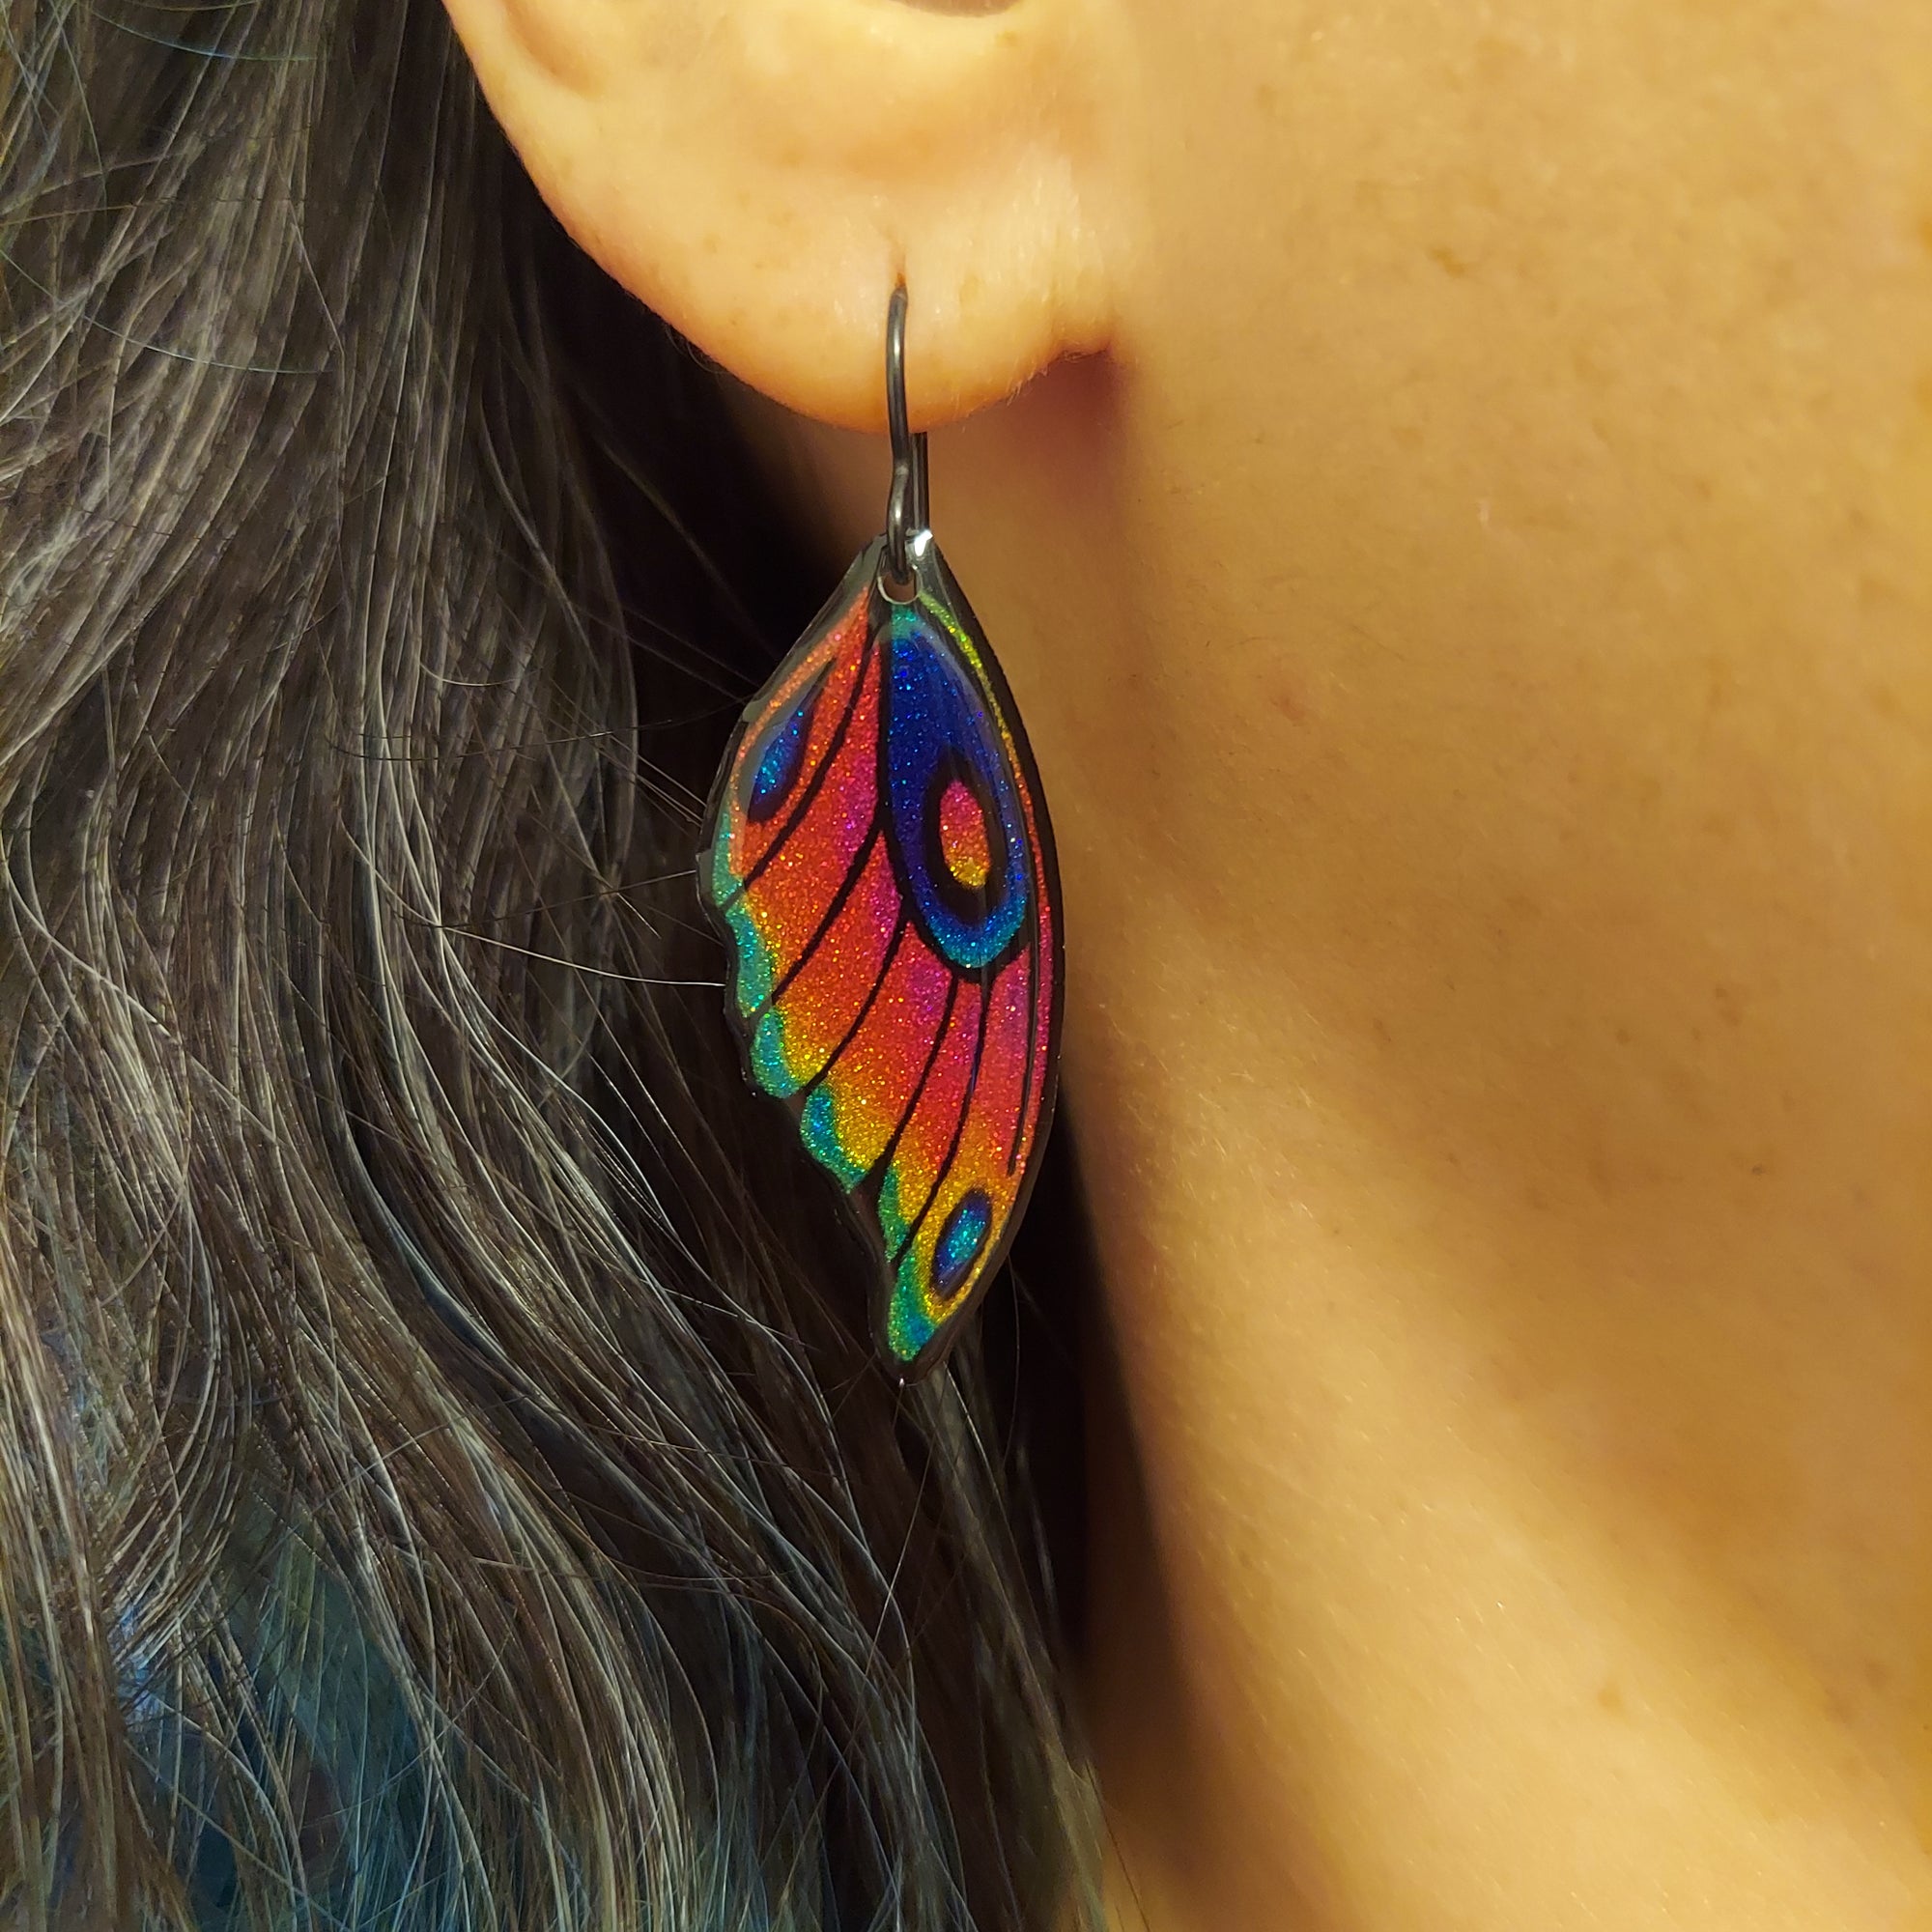 #18 (3) Red Peacock Feather Earrings